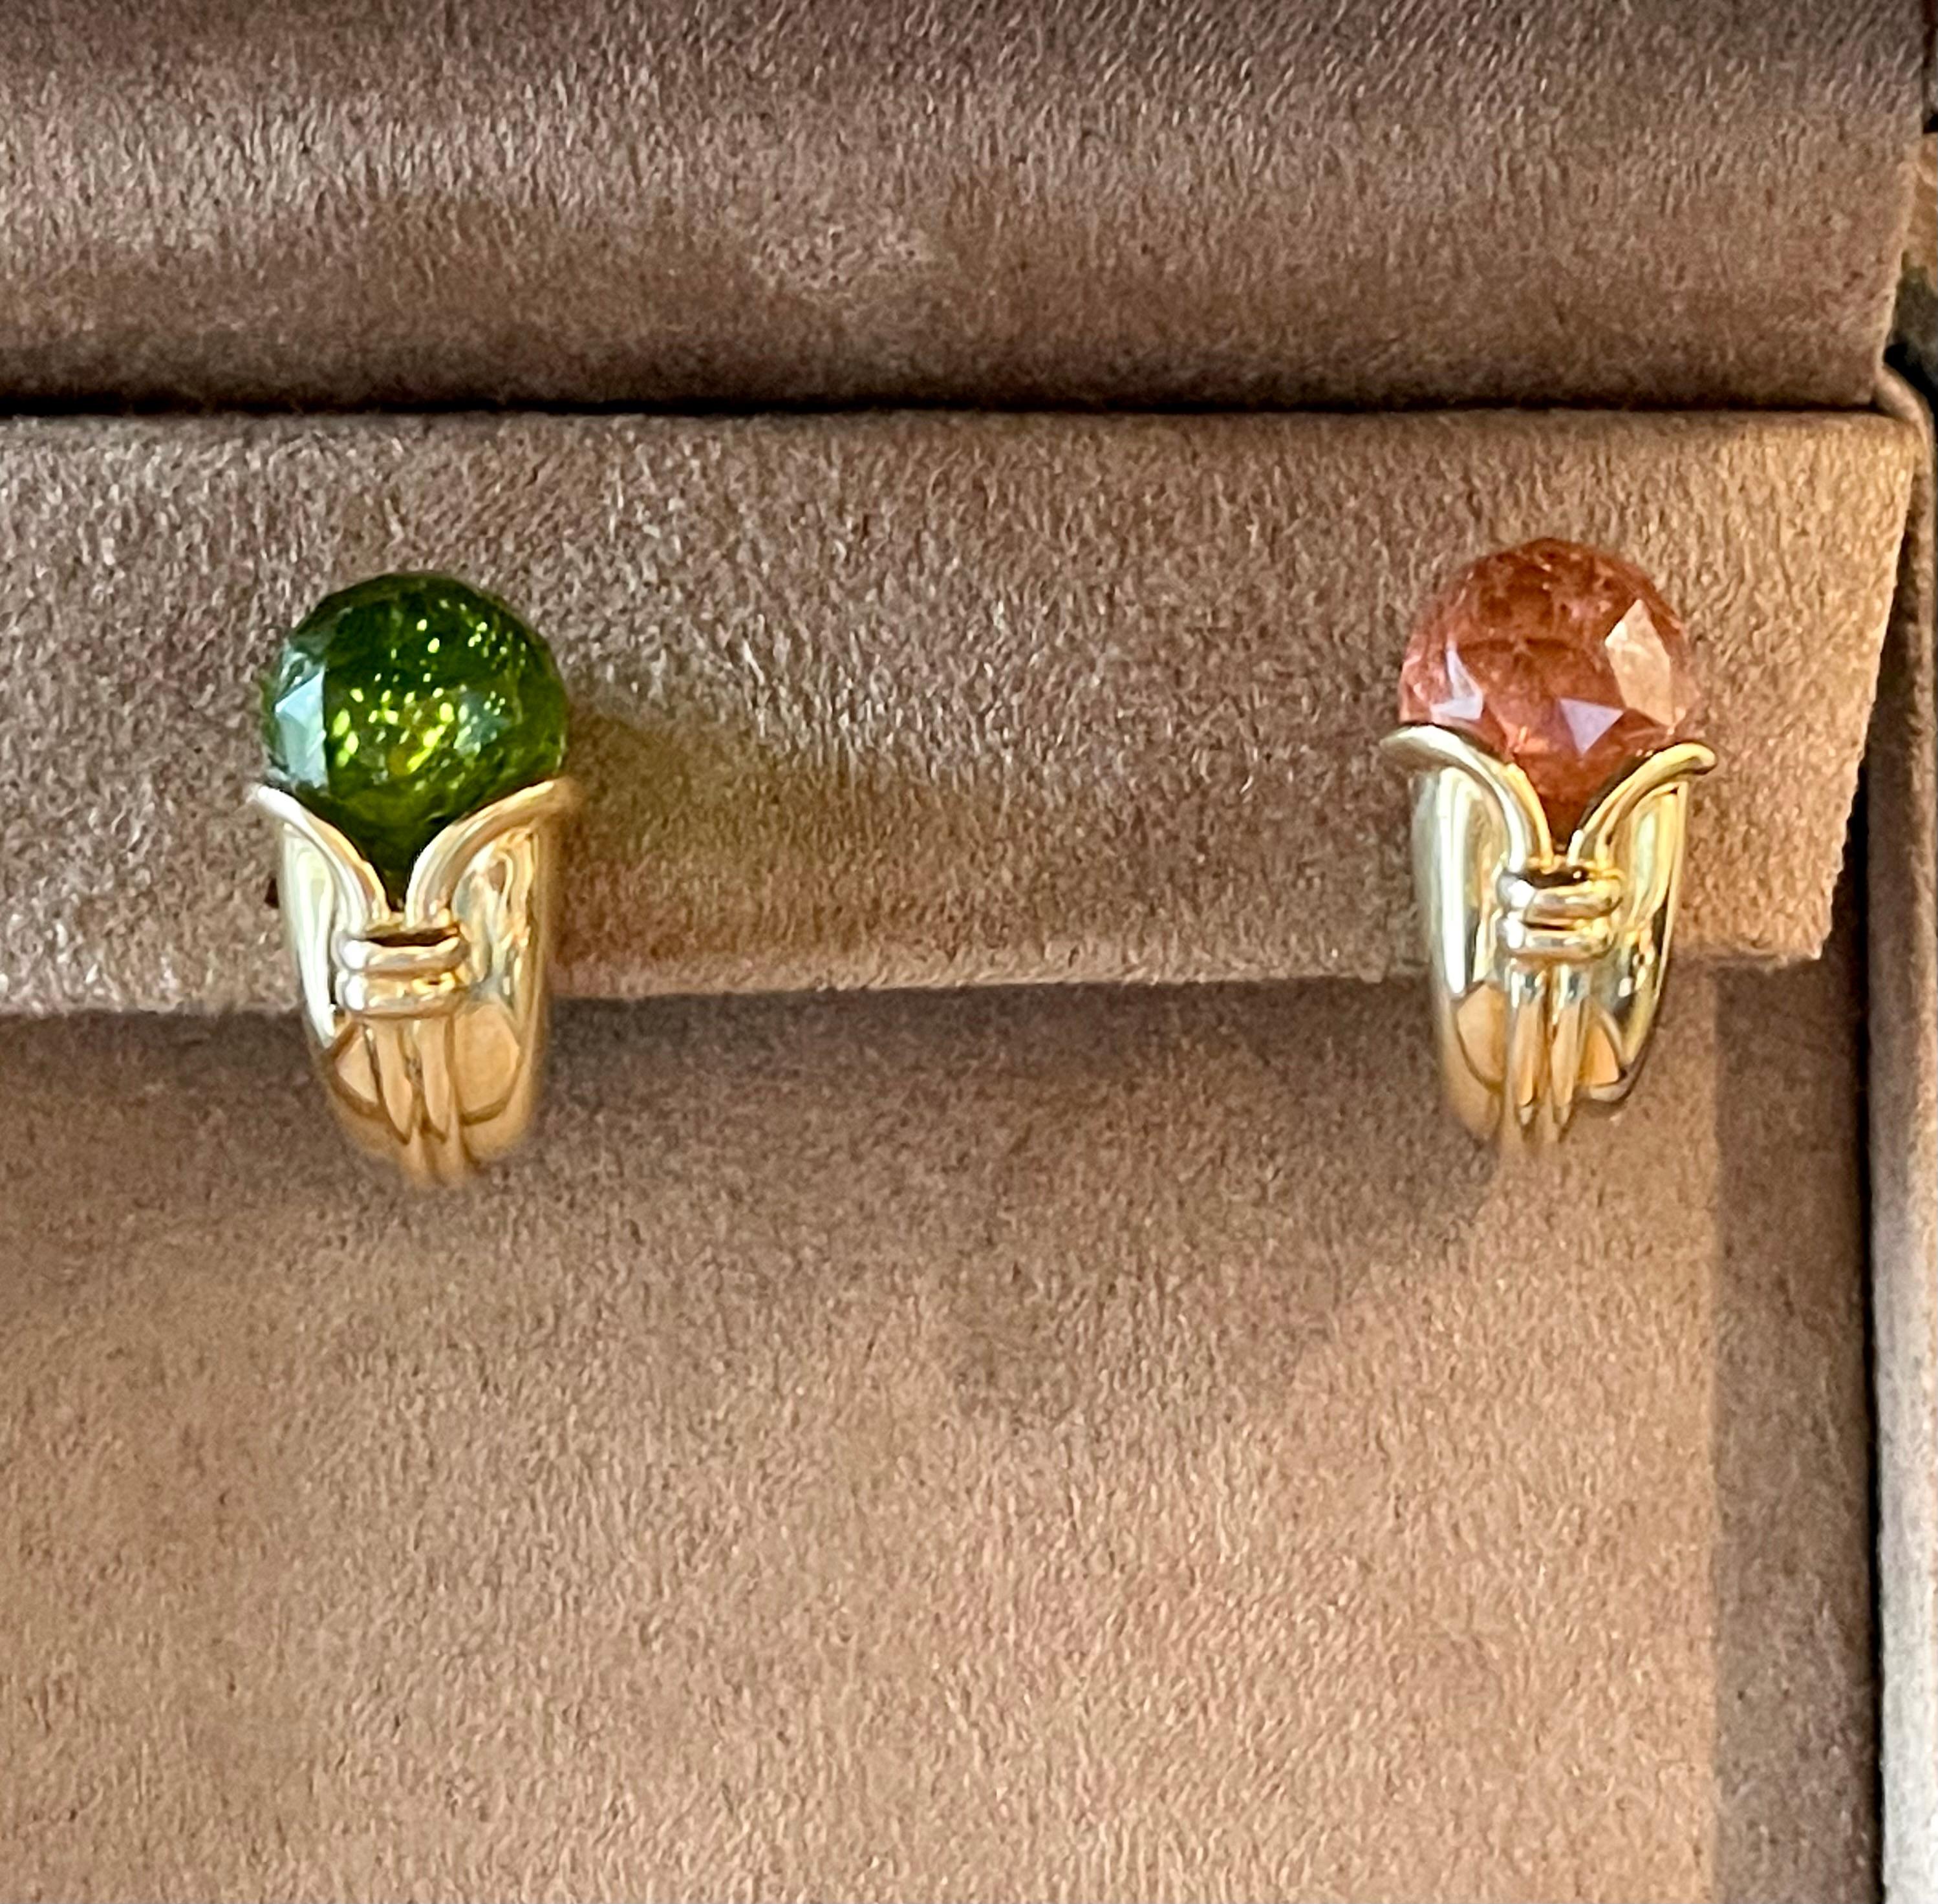 An iconic set of 18 K yellow Gold earclips showcasing 1 fancy cut Briolette pink Tourmaline and 1 fancy cut Peridot. 2.3 cm height and 1.5 cm wide. 18.52 grams. Stamped 750 with Italian assay marks for 18 karat gold
Fully signed Bvlgari, Made in